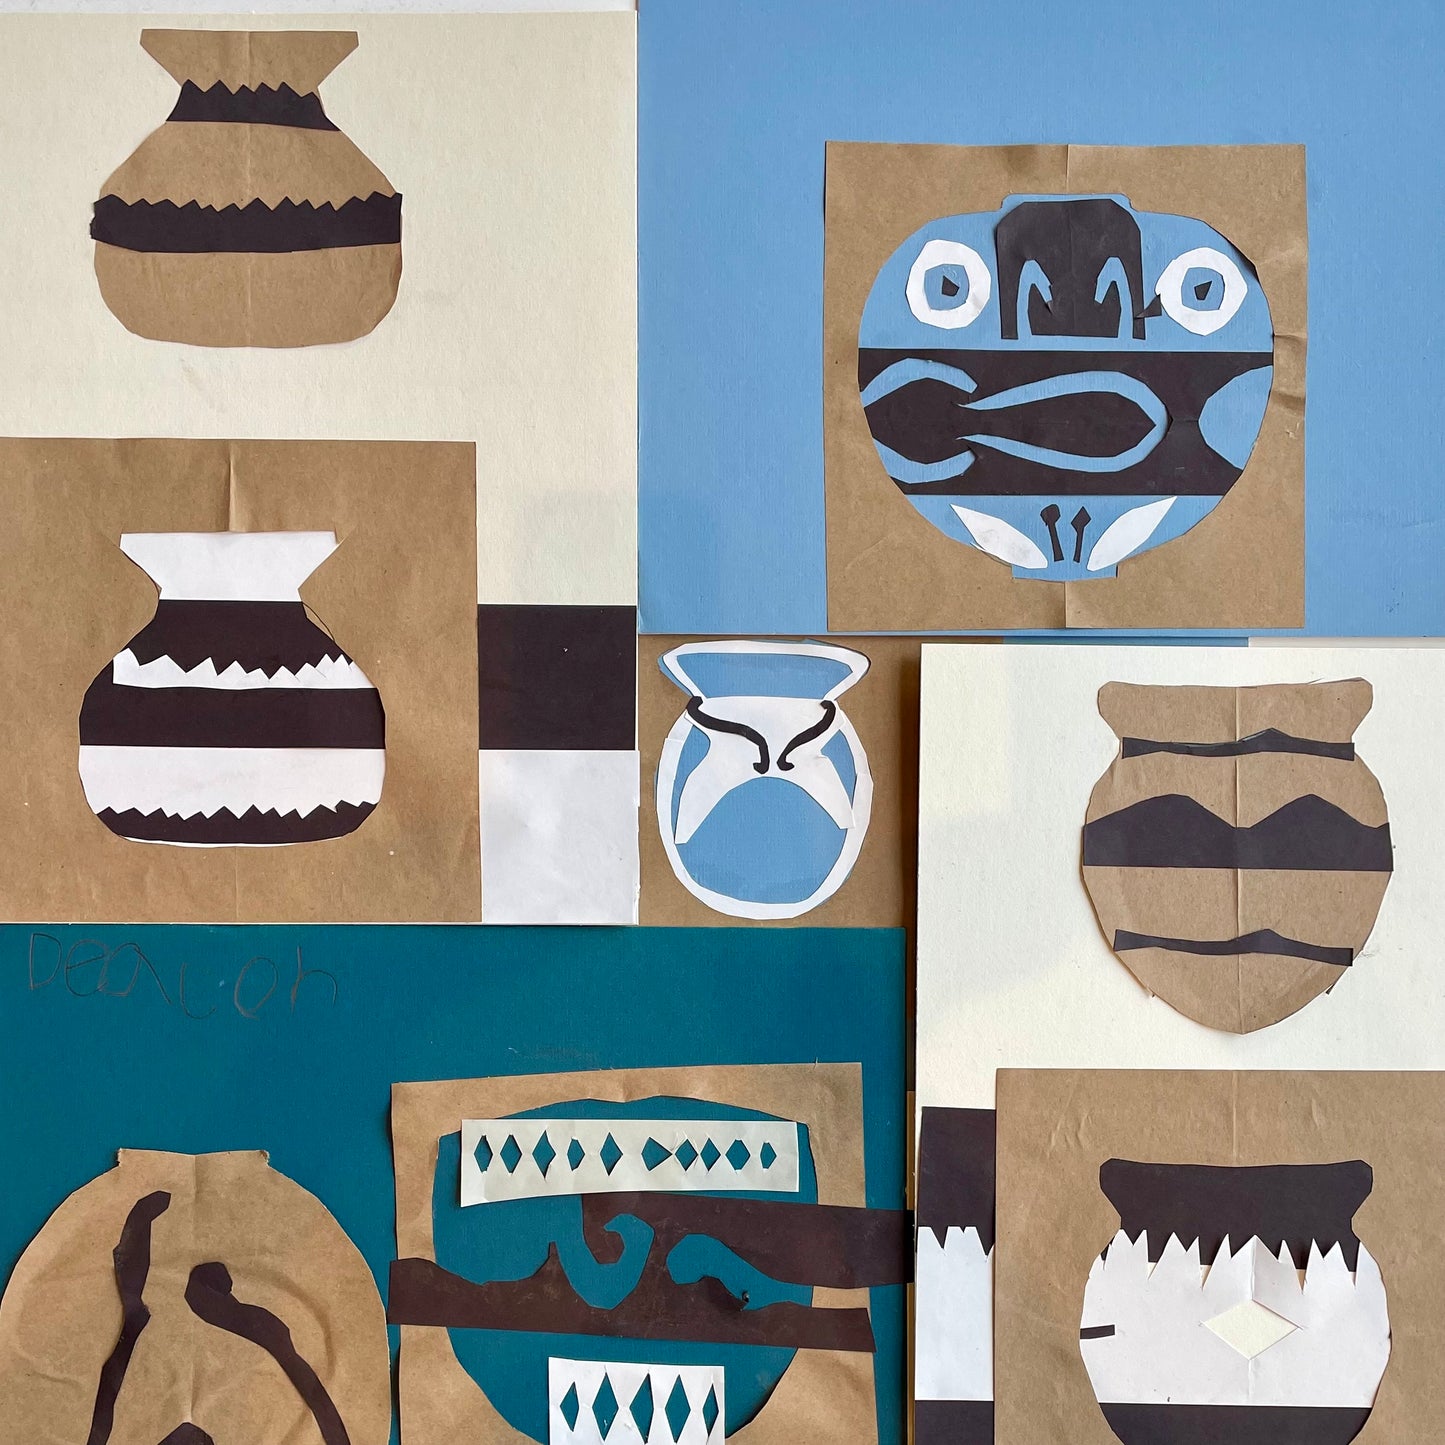 Capital One Kit: Vessel Collage with Shannon Driscoll of Oil and Cotton